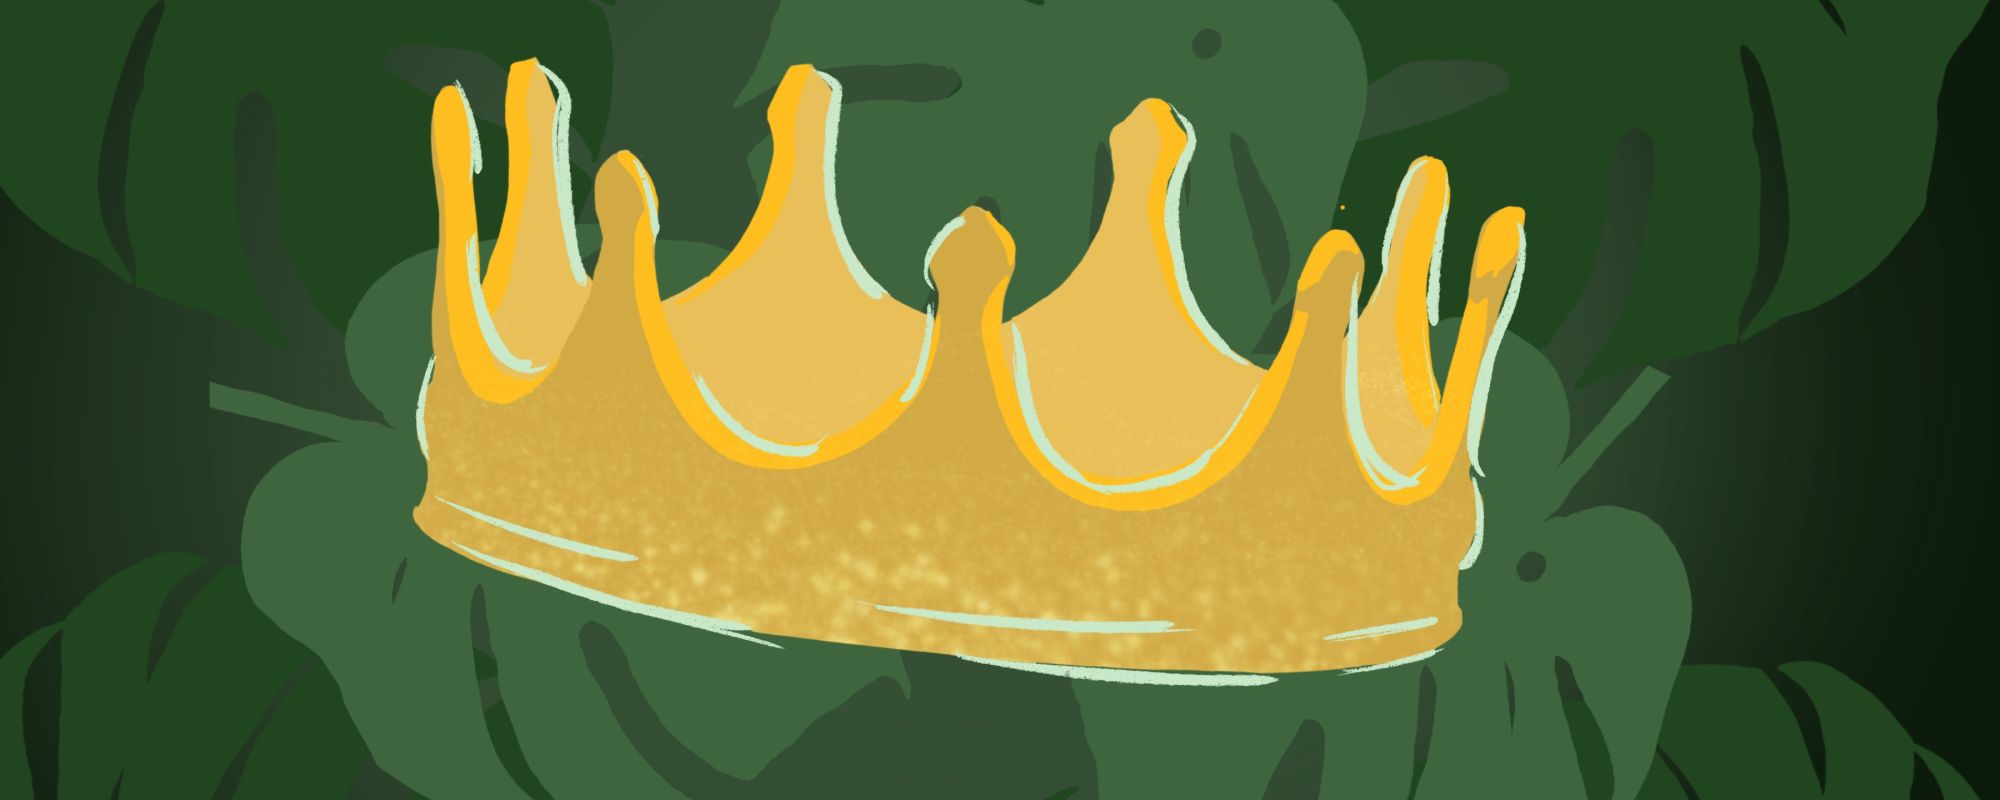 a crown on a green background